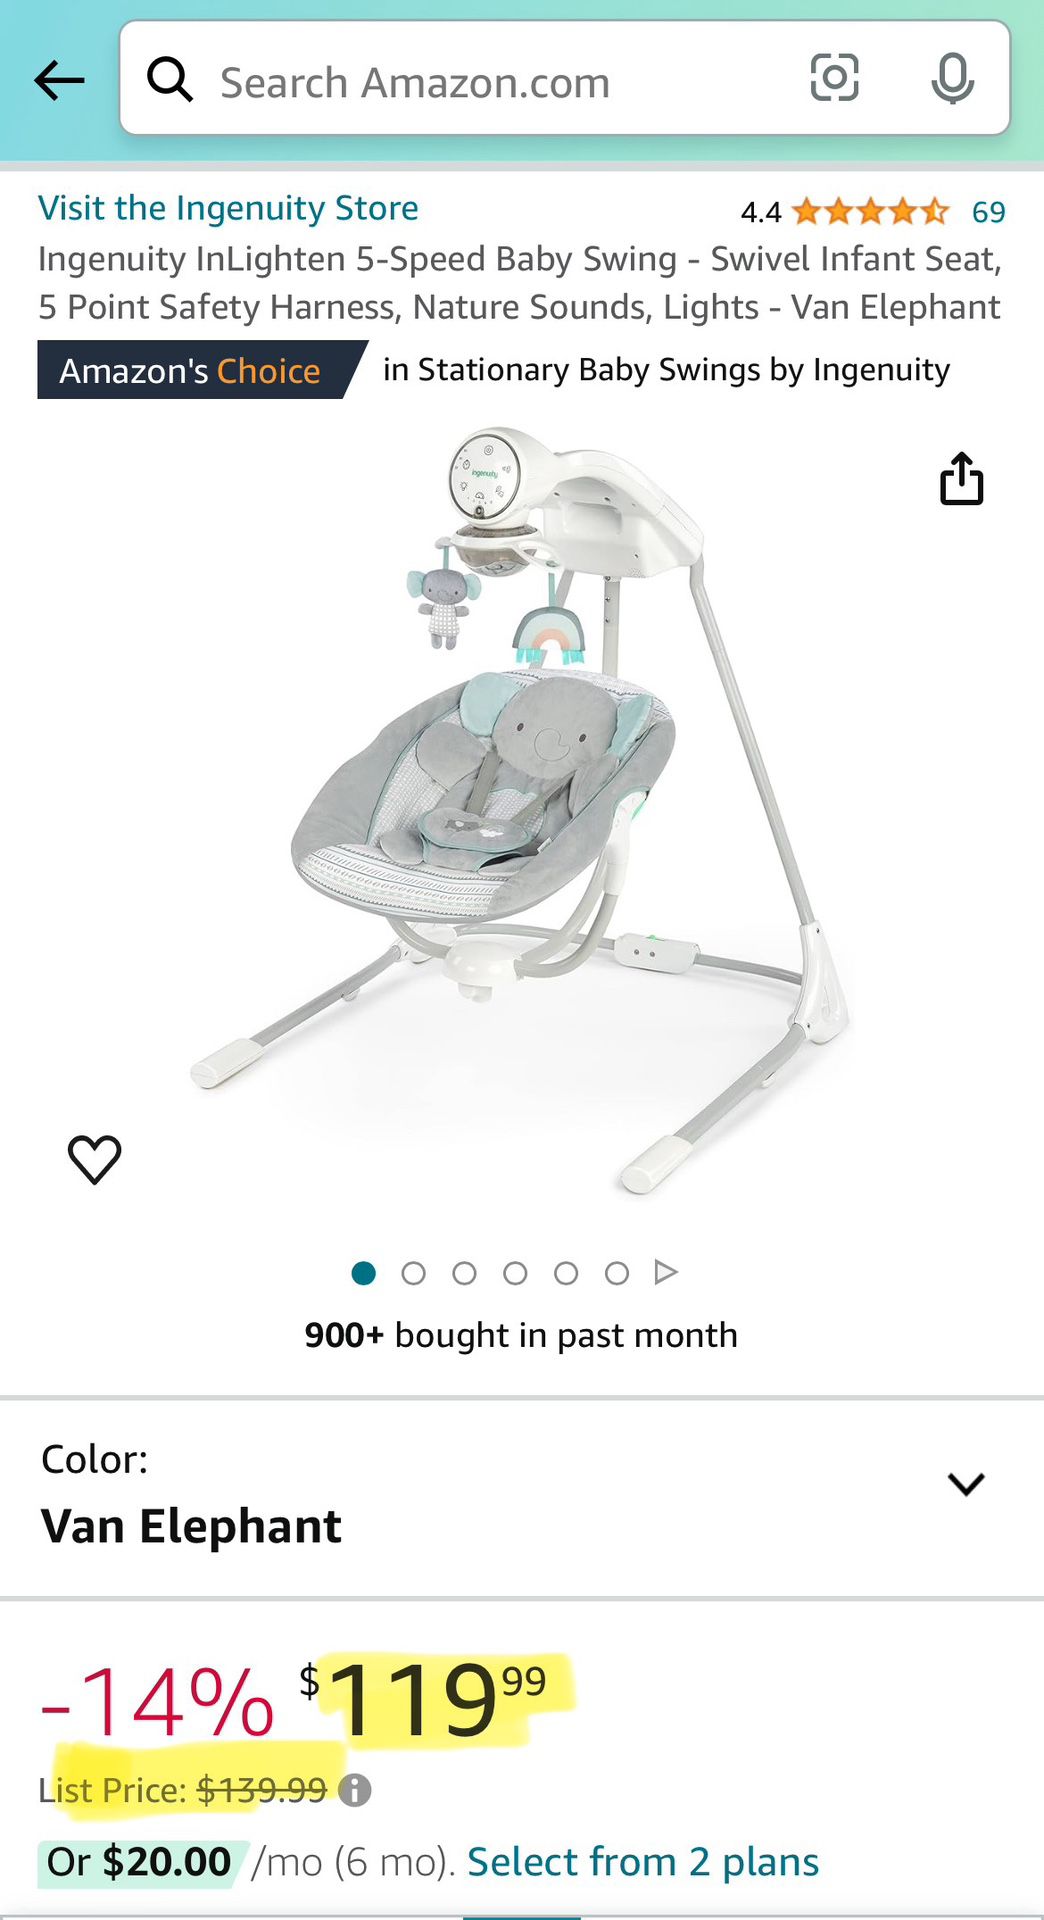 BRAND NEW!!! Ingenuity InLighten 5-Speed Baby Swing - Swivel Infant Seat, 5 Point Safety Harness, Nature Sounds, Lights - Van Elephant